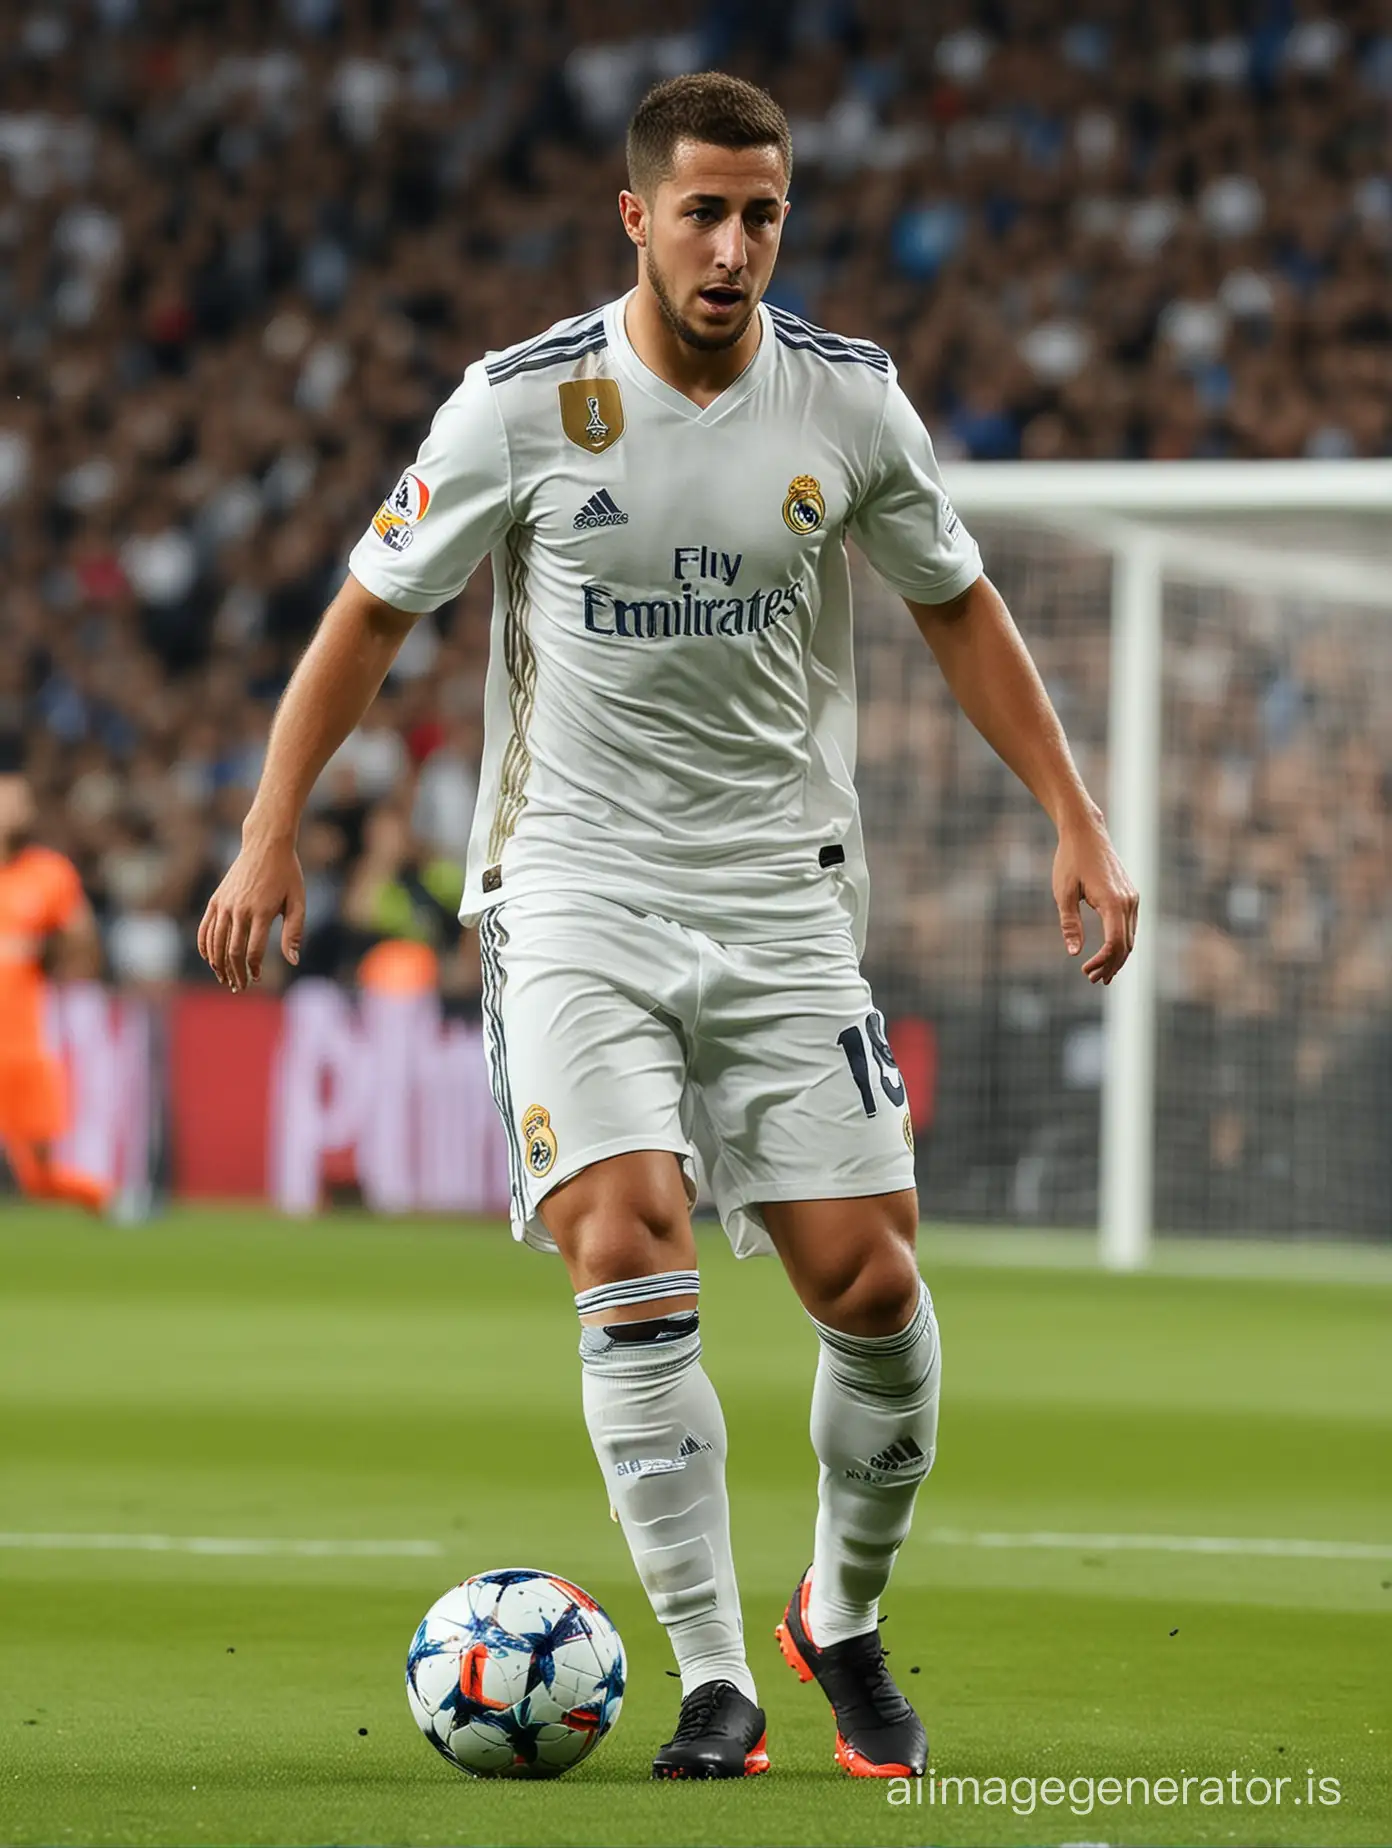 Eden-Hazard-Dribbling-for-Real-Madrid-in-Match-Action